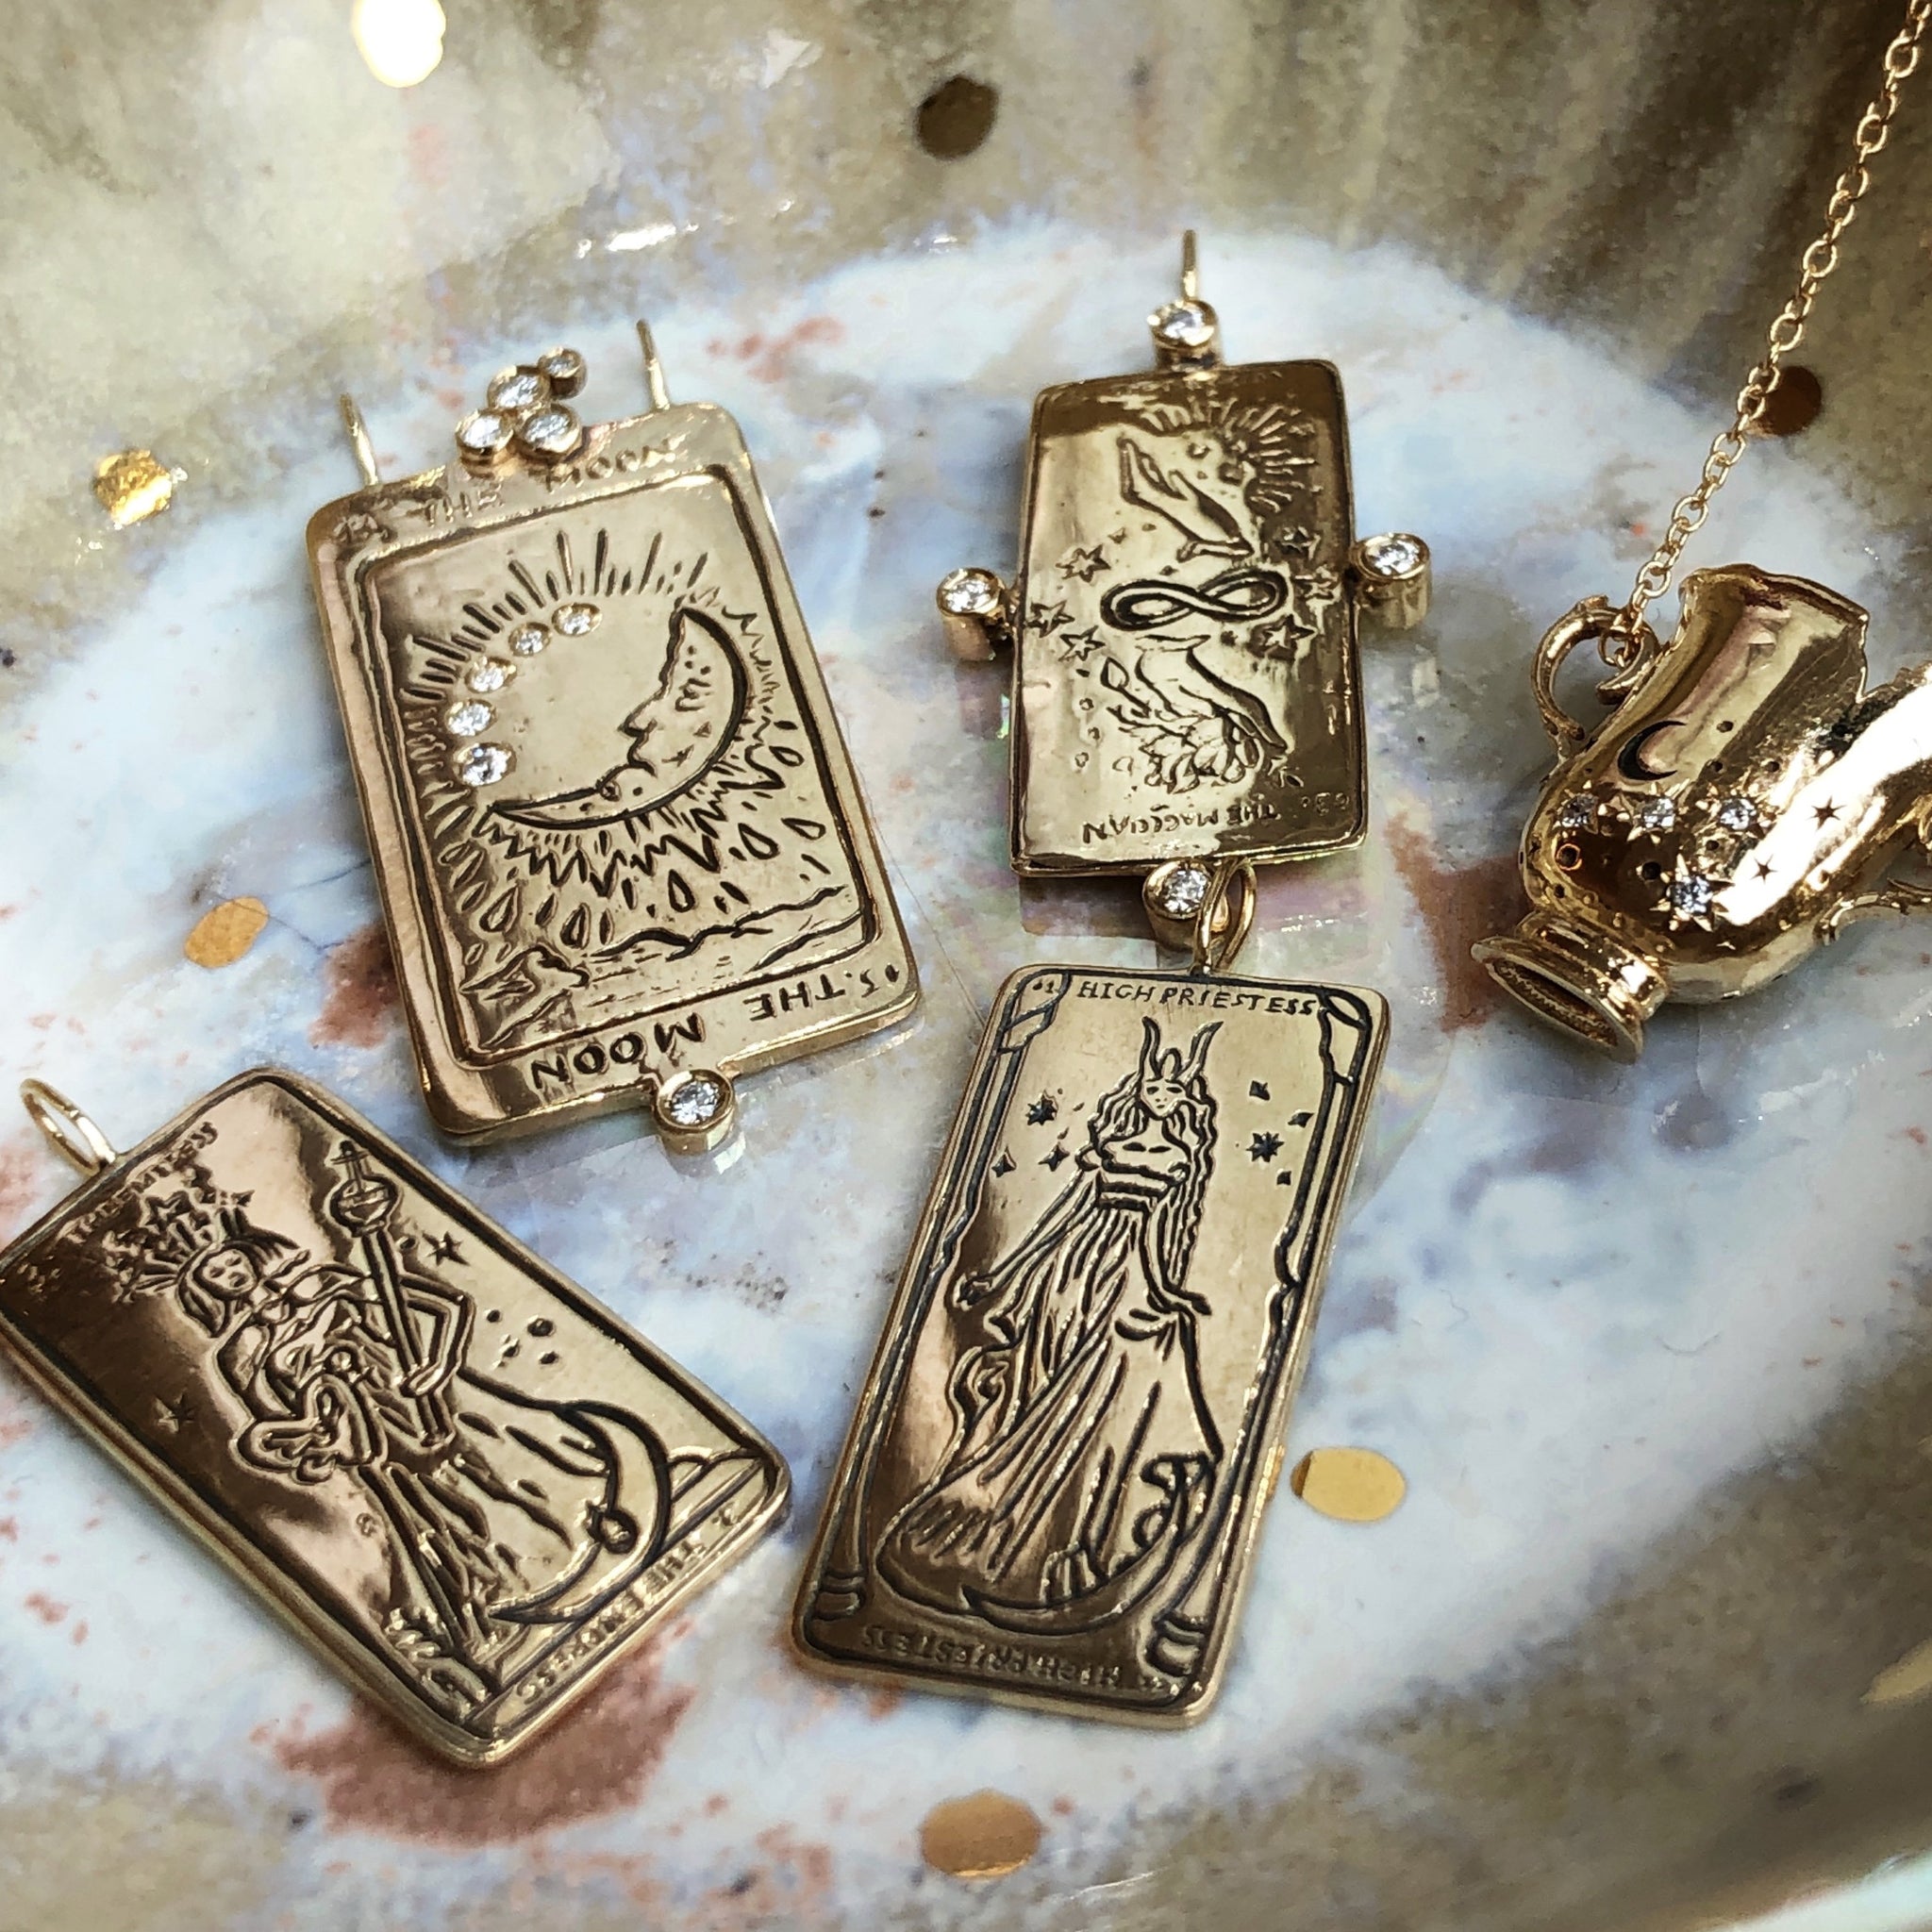 Tarot Cards Necklace the Star Tarot Necklace Sterling Silver , Tarot Gifts Tarot  Pendant Tarot Jewelry Gold Gift for Her by Demir Uluer - Etsy | Tarot  gifts, Gold gift, Silver necklaces